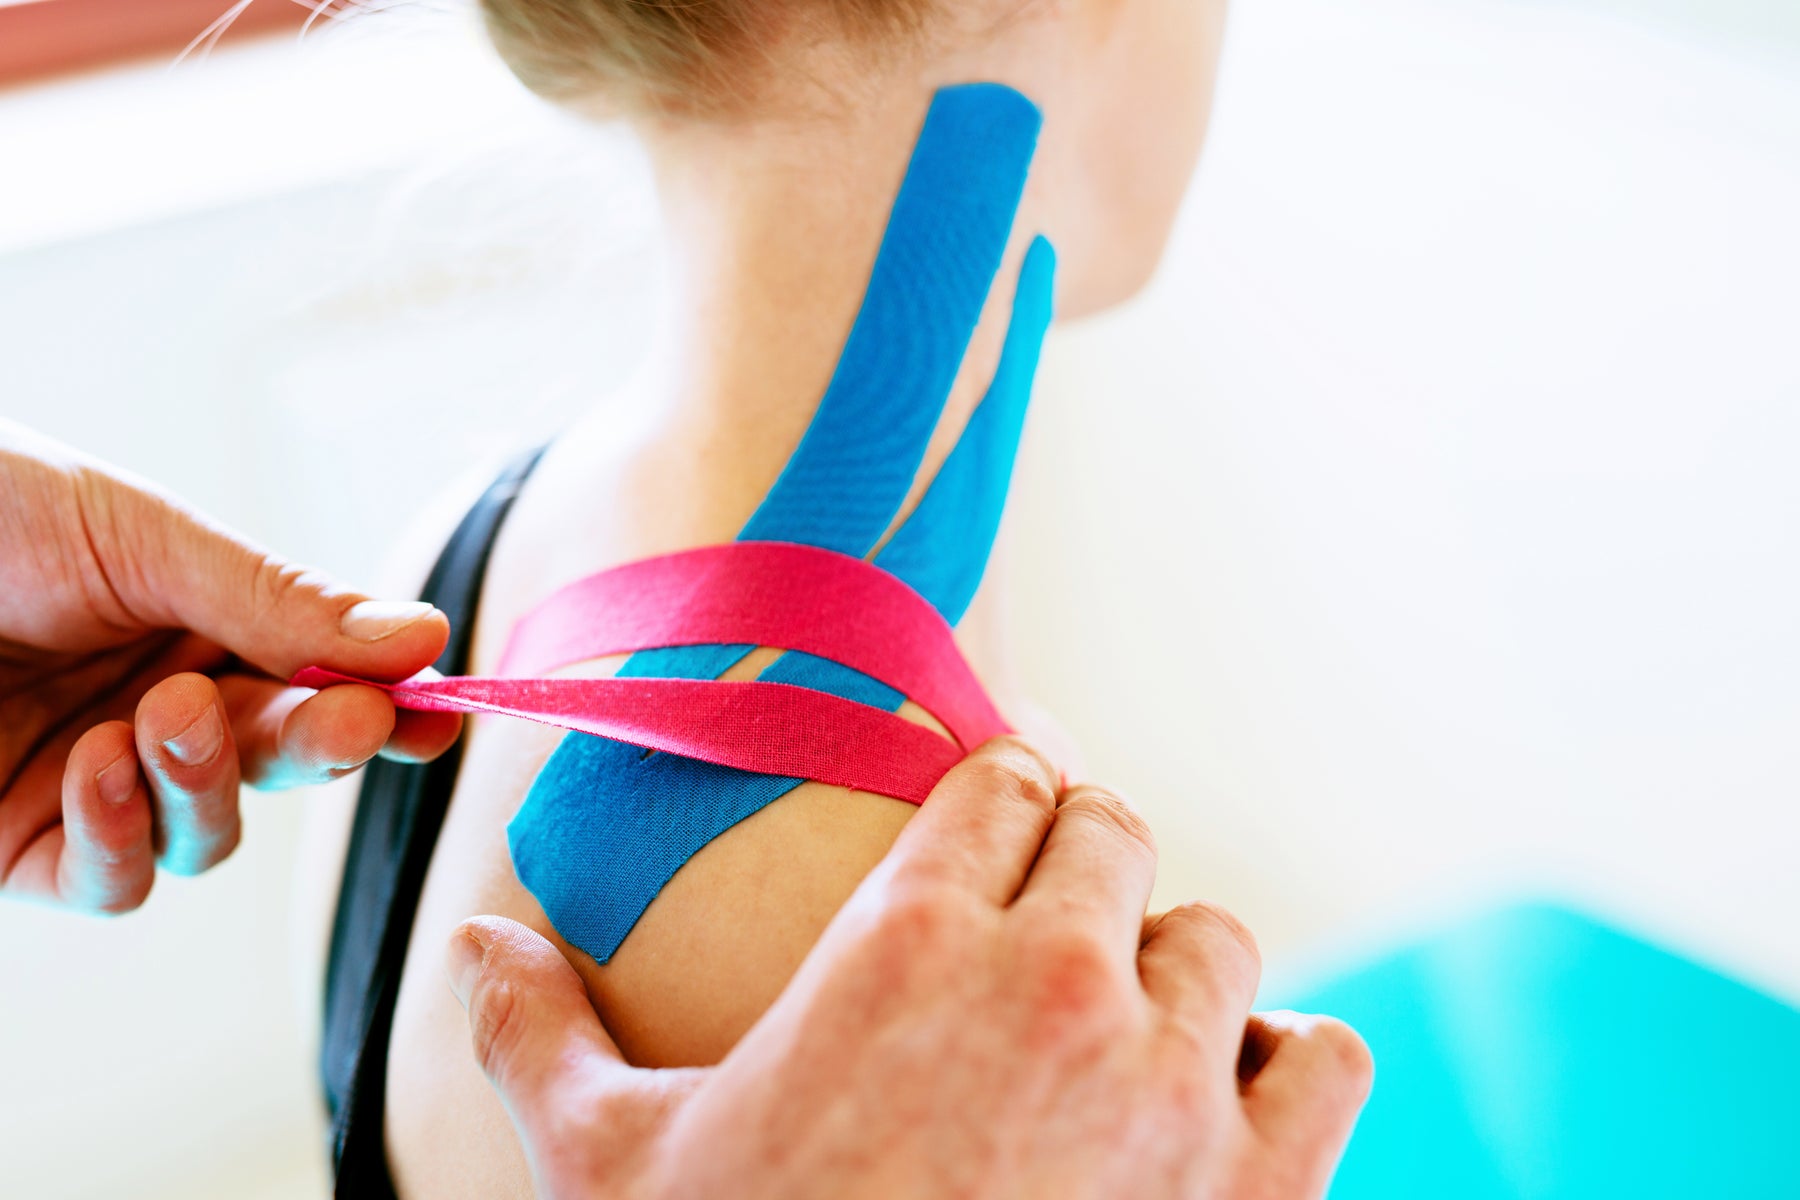 The Benefits and Uses of Kinesiology Tape